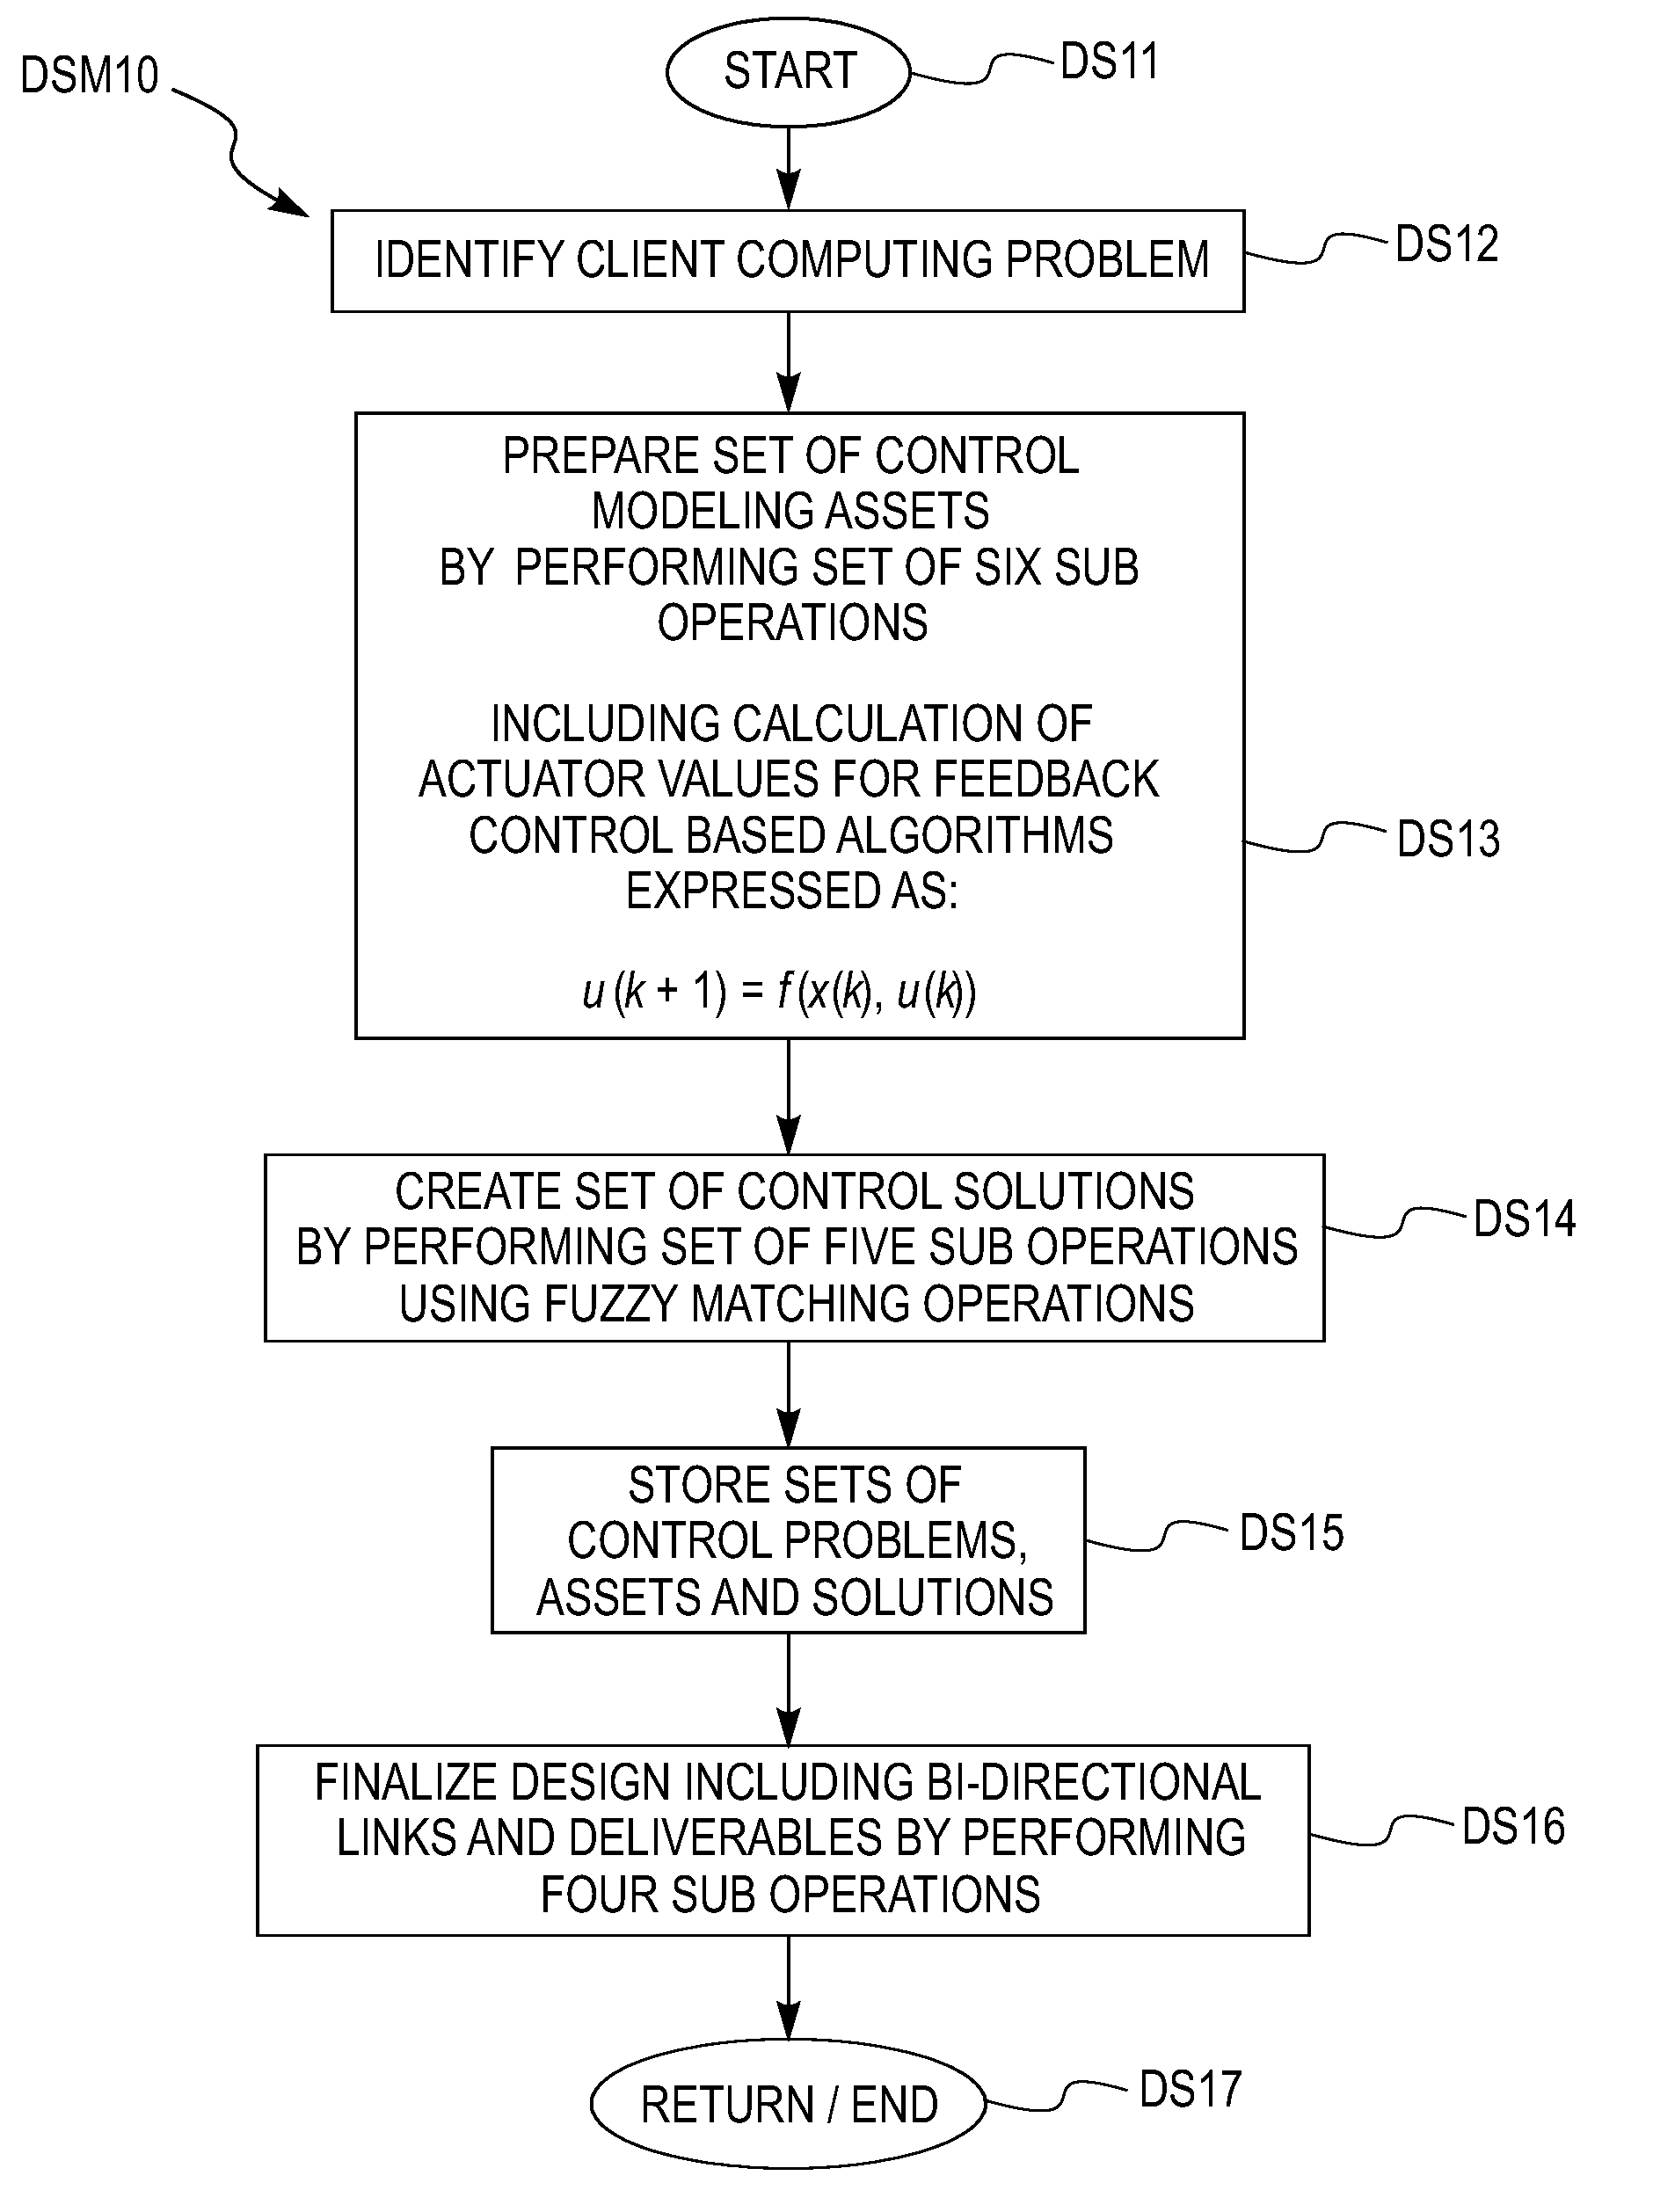 System and method for service offering for feedback controller design and implementation for performance management in information technology systems